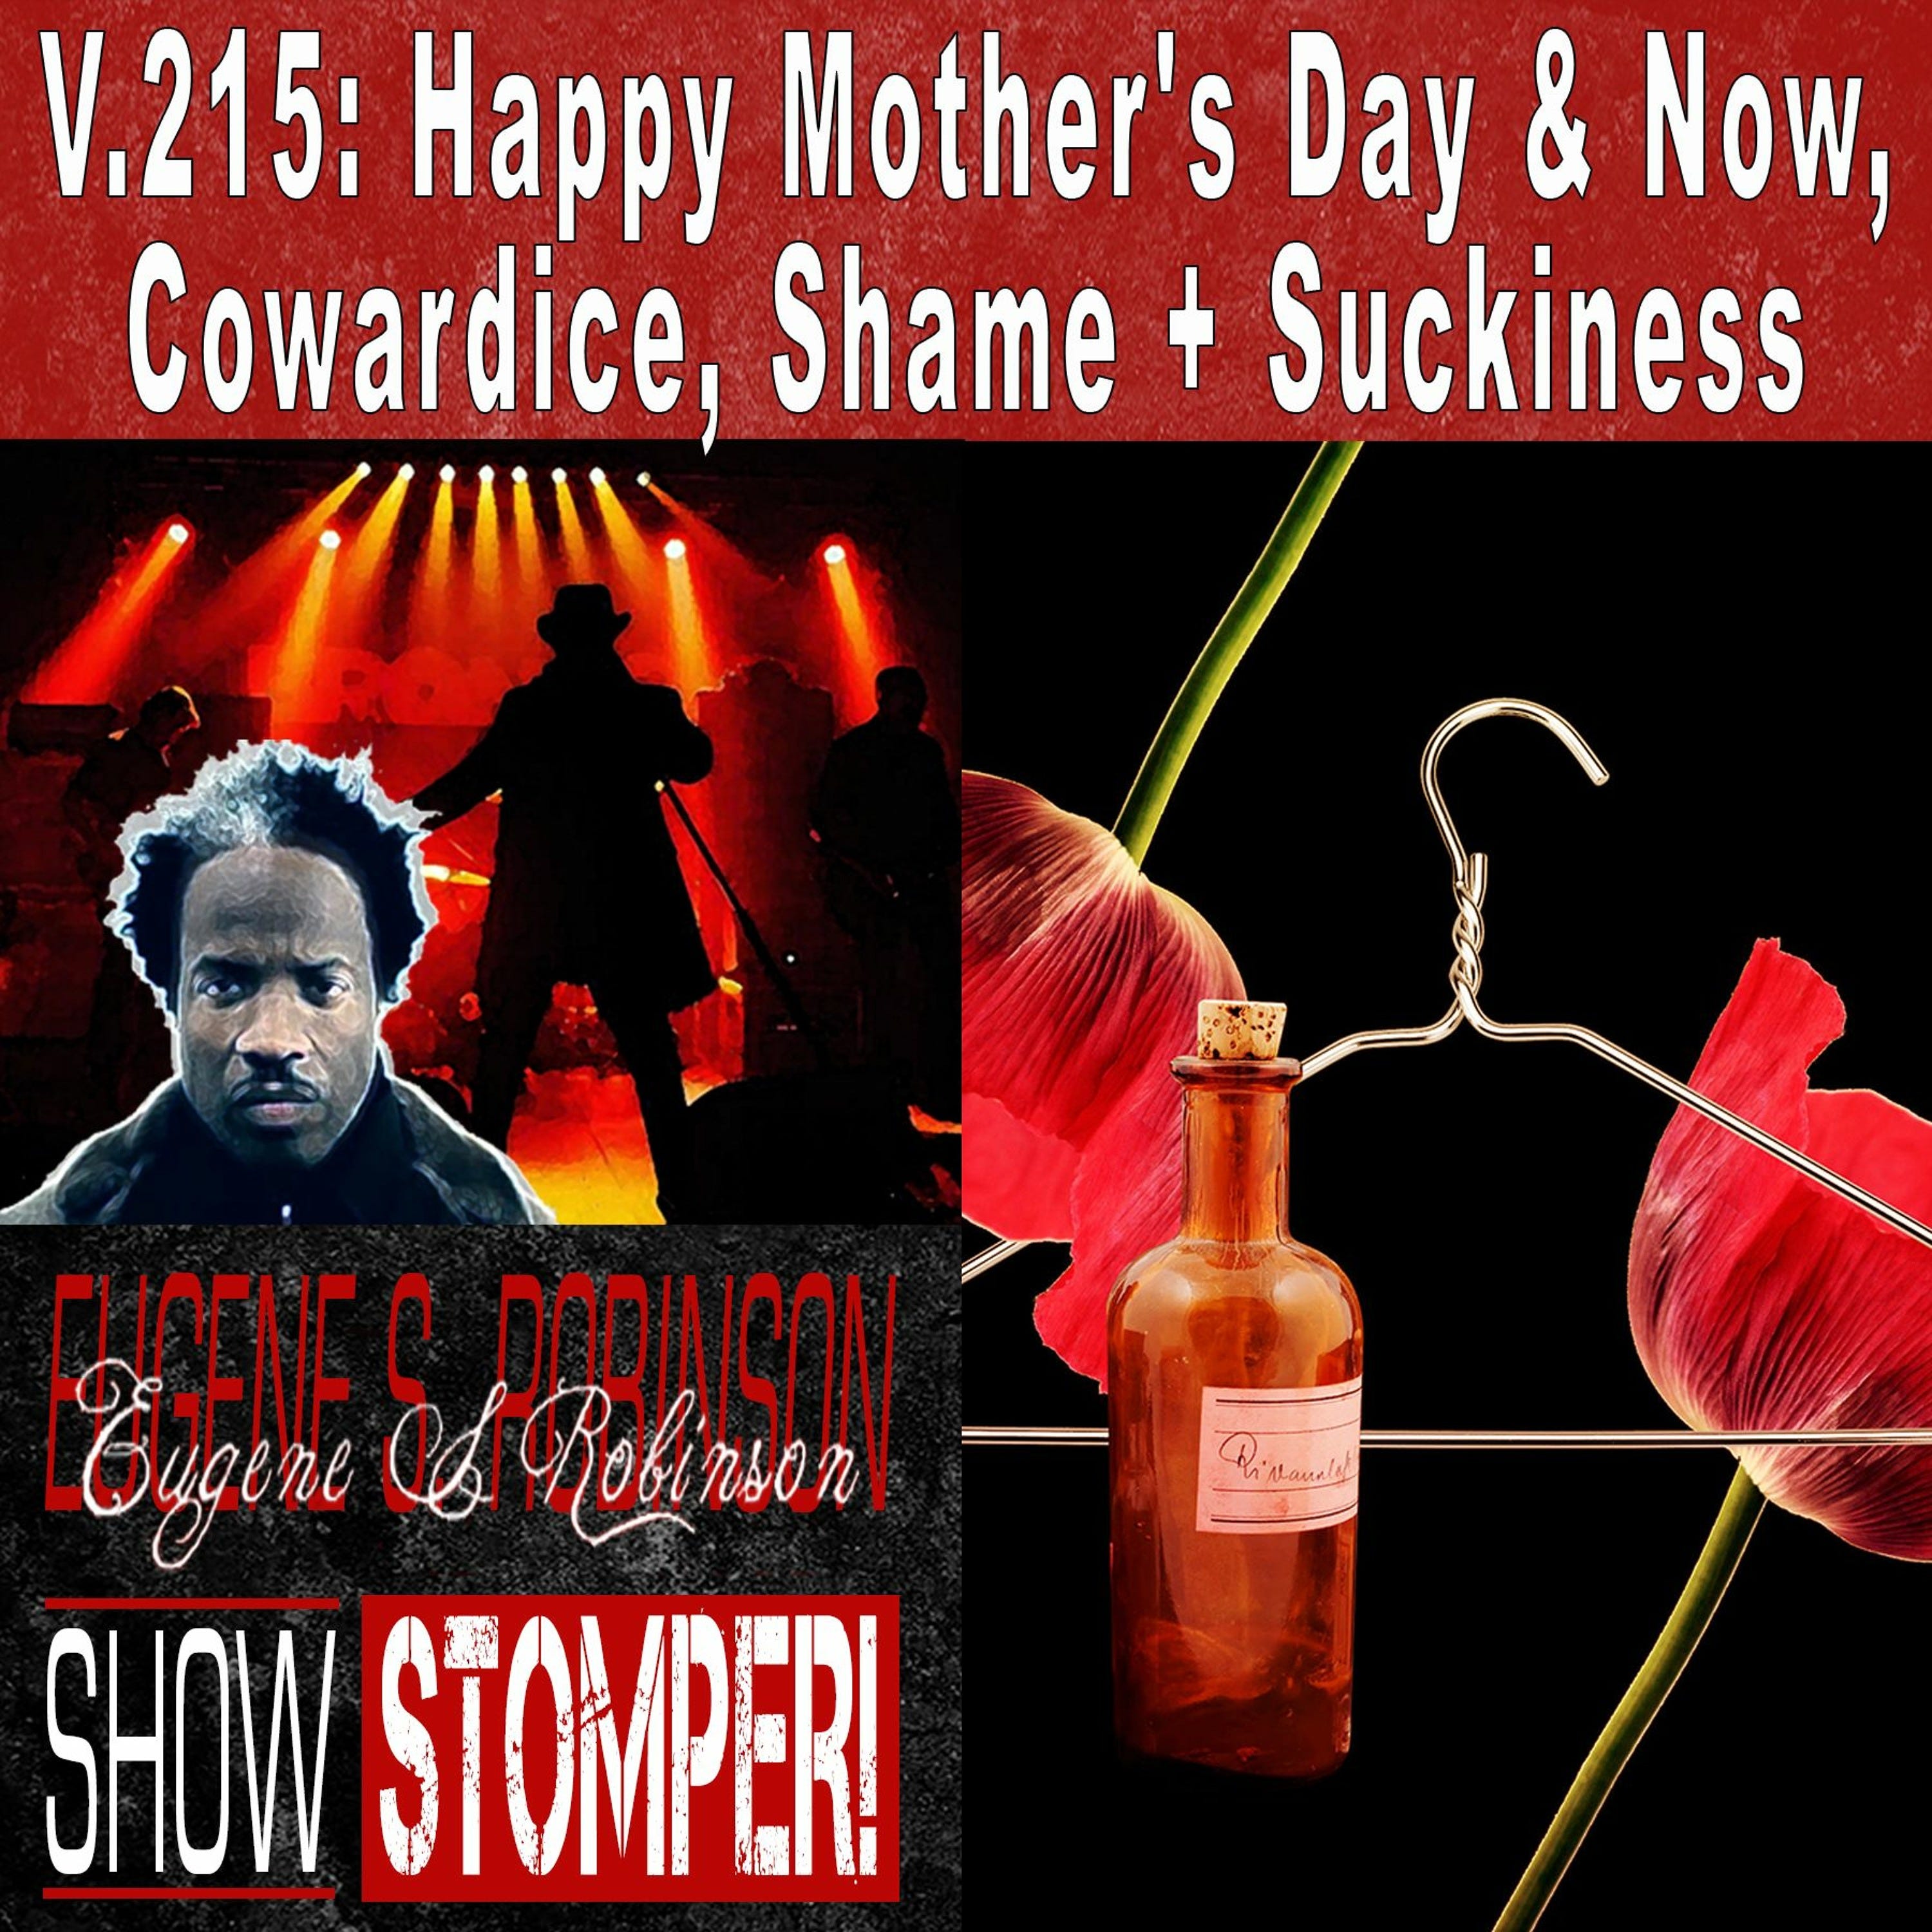 V.215: Happy Mother's Day & Now, Cowardice, Shame+Suckiness On The Eugene S. Robinson Show Stomper!